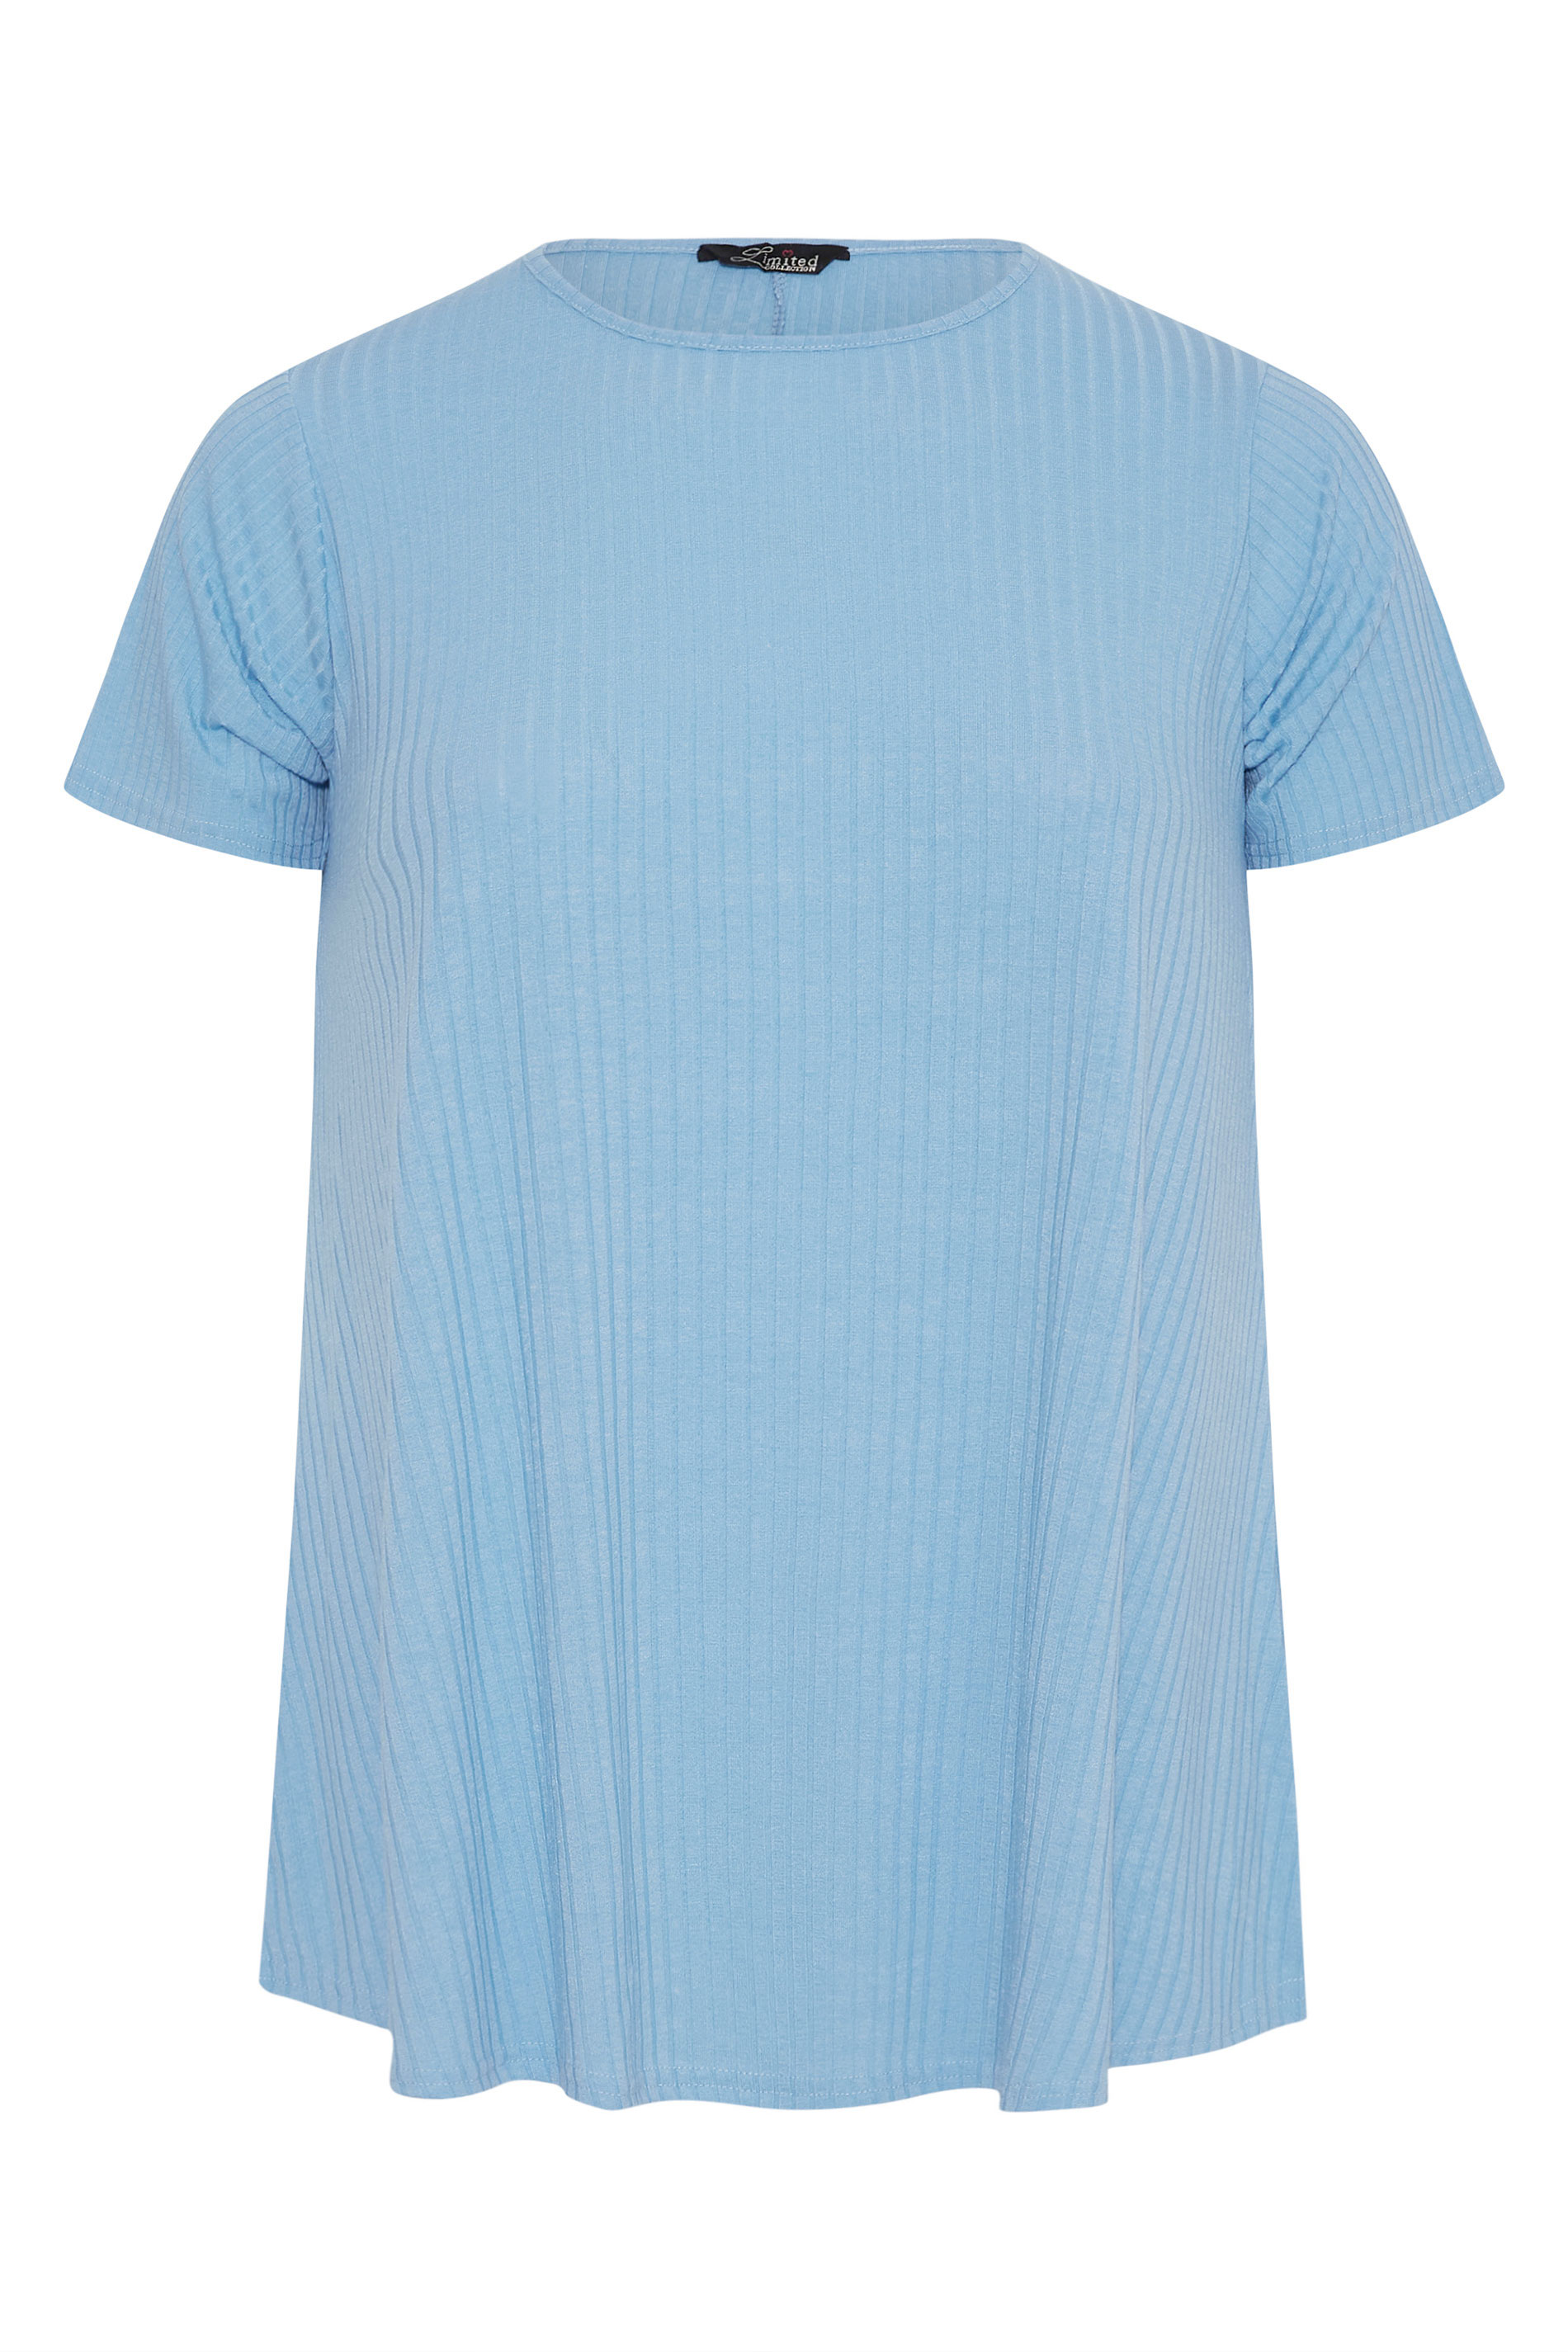 Grande taille  Tops Grande taille  Tops Jersey | LIMITED COLLECTION - Top Manches Courtes Bleu Nervuré - DW44405